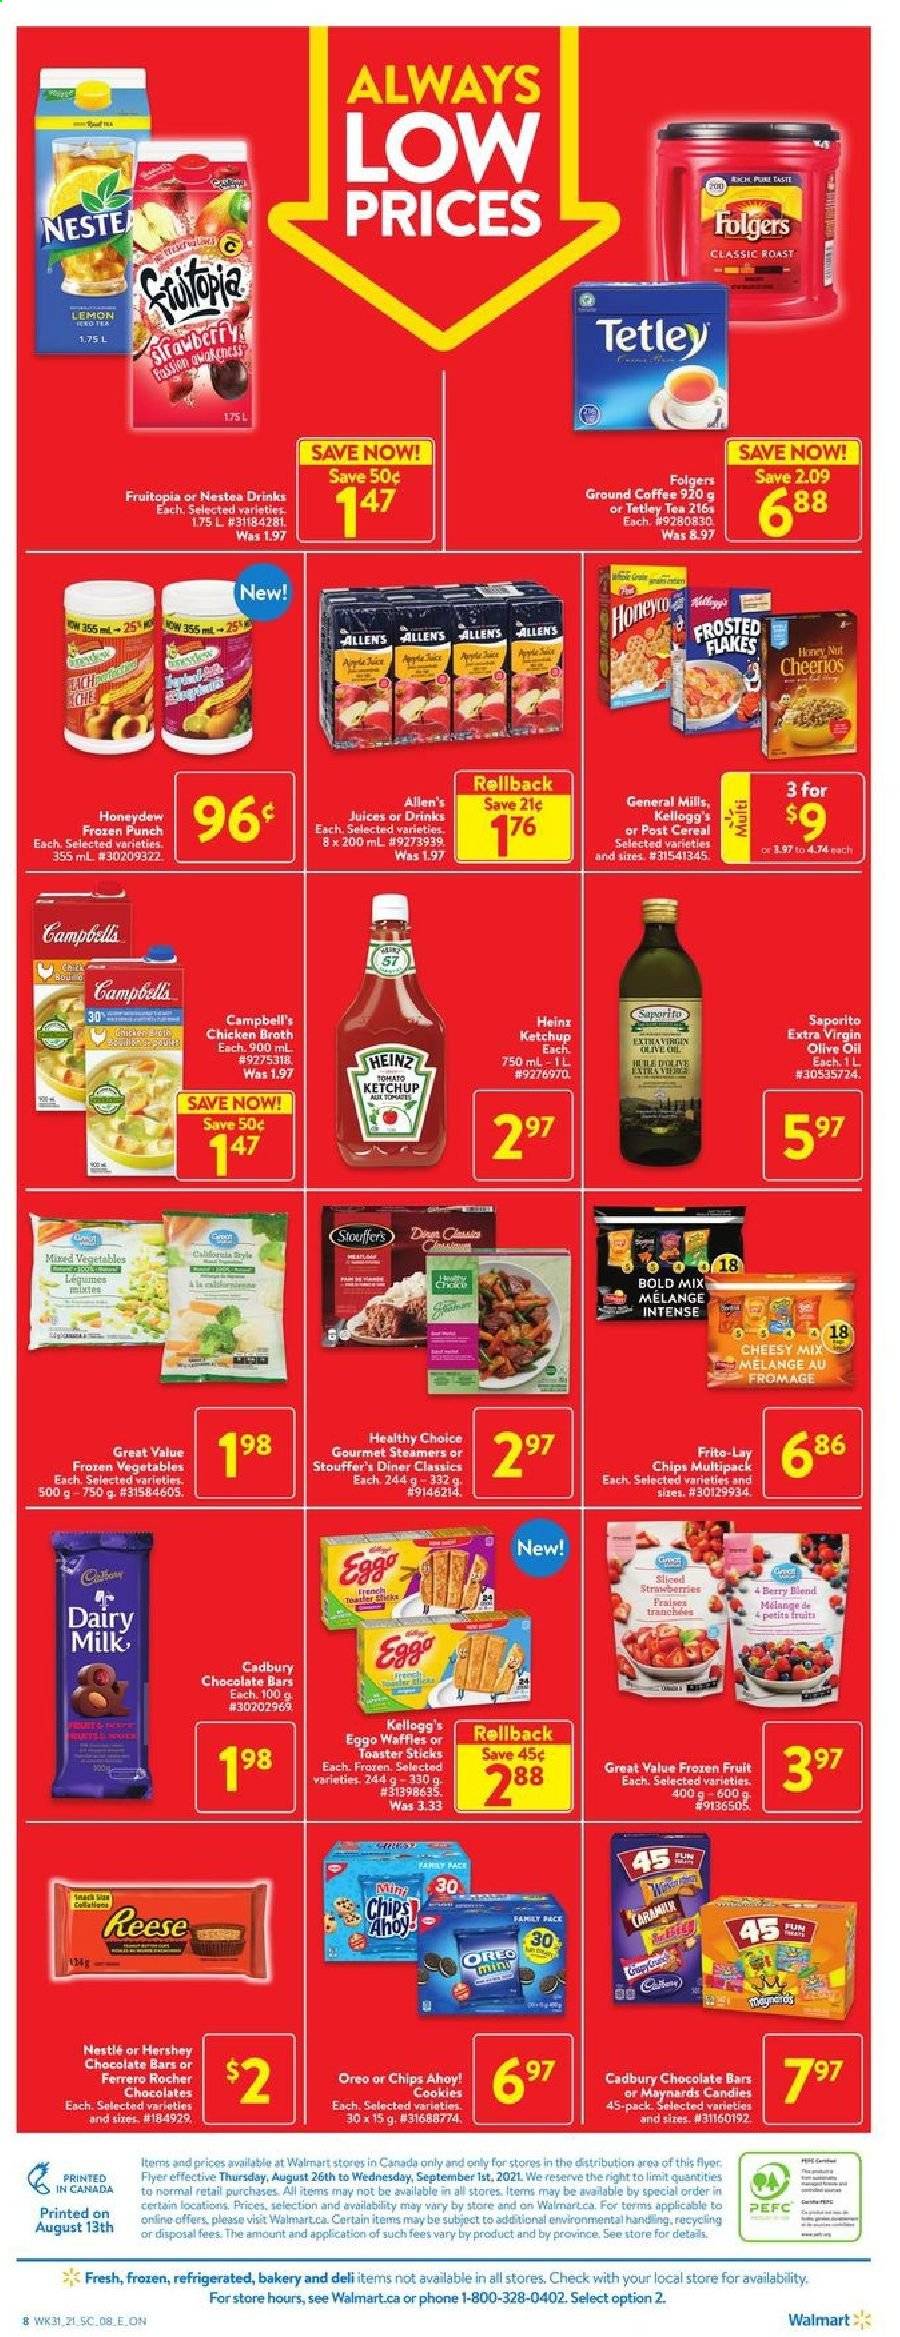 thumbnail - Walmart Flyer - August 26, 2021 - September 01, 2021 - Sales products - waffles, honeydew, Campbell's, Healthy Choice, eggs, frozen vegetables, Stouffer's, cookies, Kellogg's, Cadbury, Dairy Milk, Chips Ahoy!, chocolate bar, Frito-Lay, chicken broth, broth, Heinz, cereals, Cheerios, Frosted Flakes, extra virgin olive oil, olive oil, oil, juice, tea, coffee, Folgers, ground coffee, punch, Nestlé, toaster. Page 5.